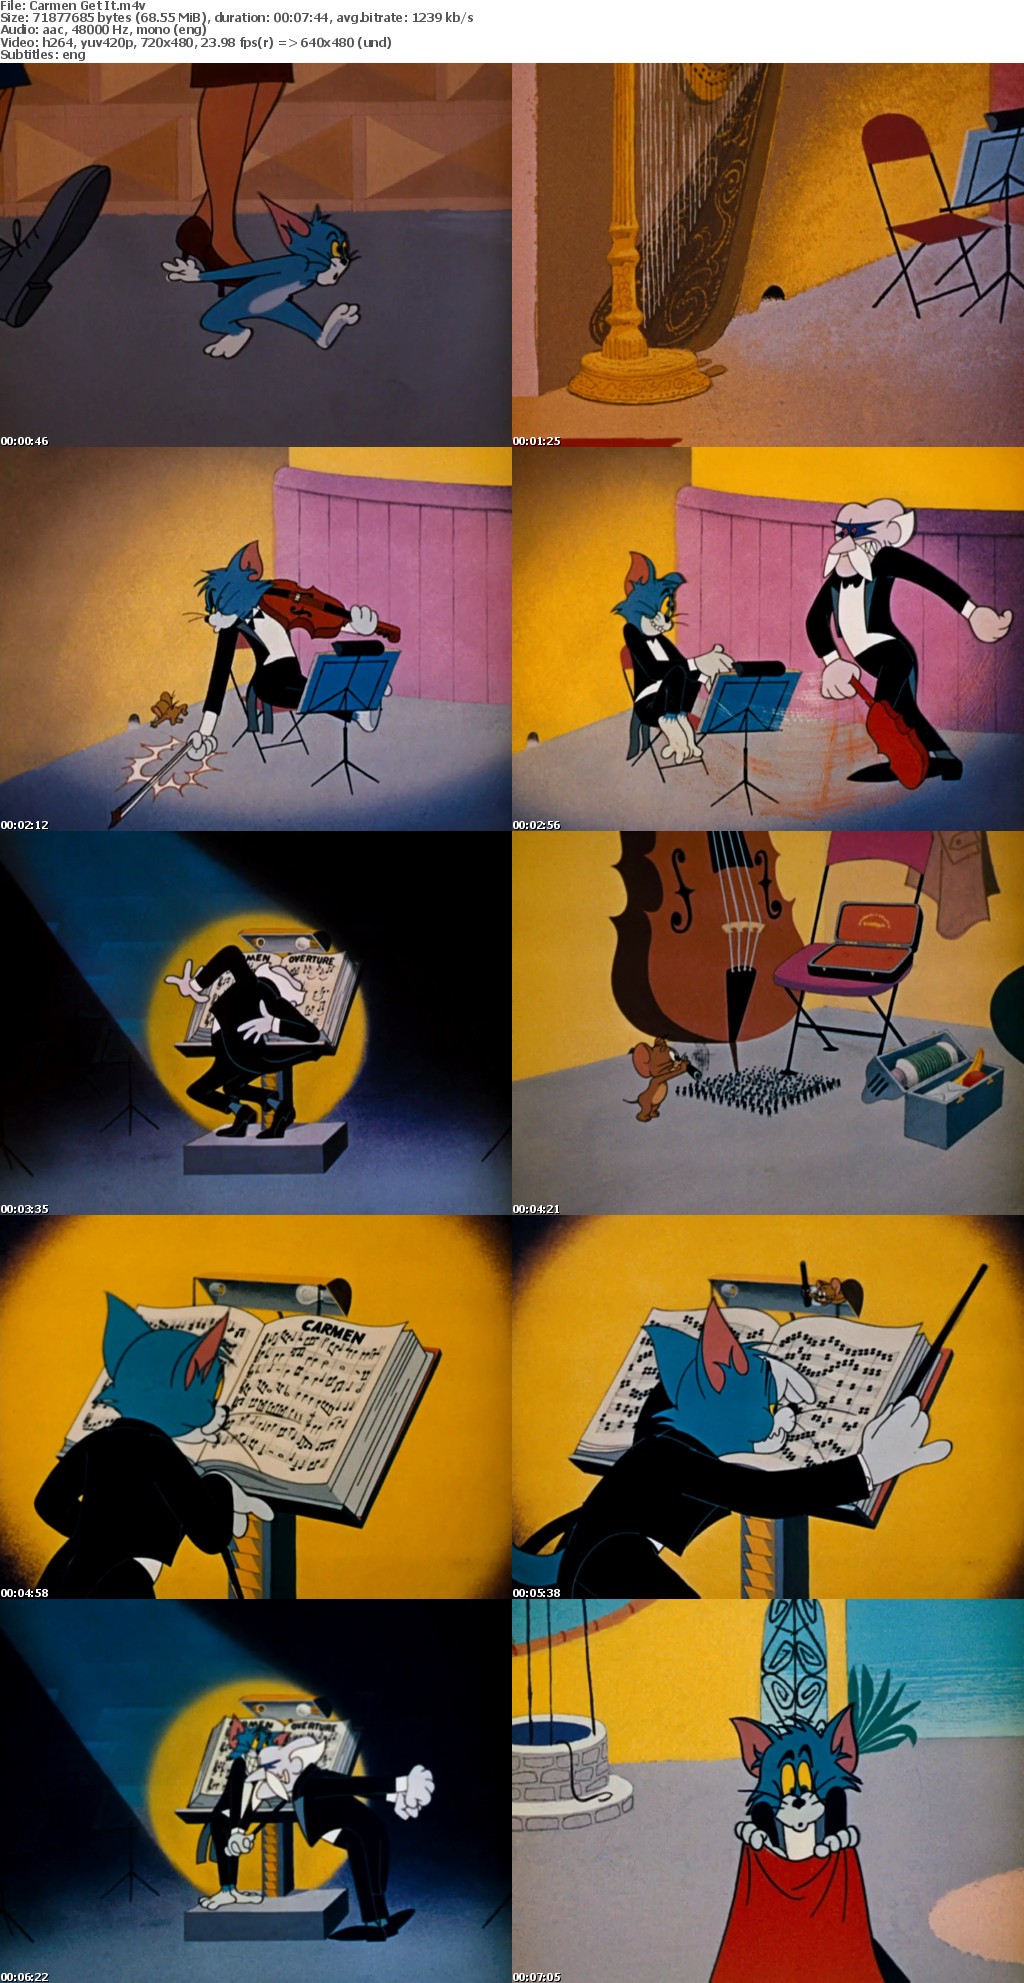 Tom and Jerry - The Gene Deitch Collection (13 cartoons) 480p x264 schuylang